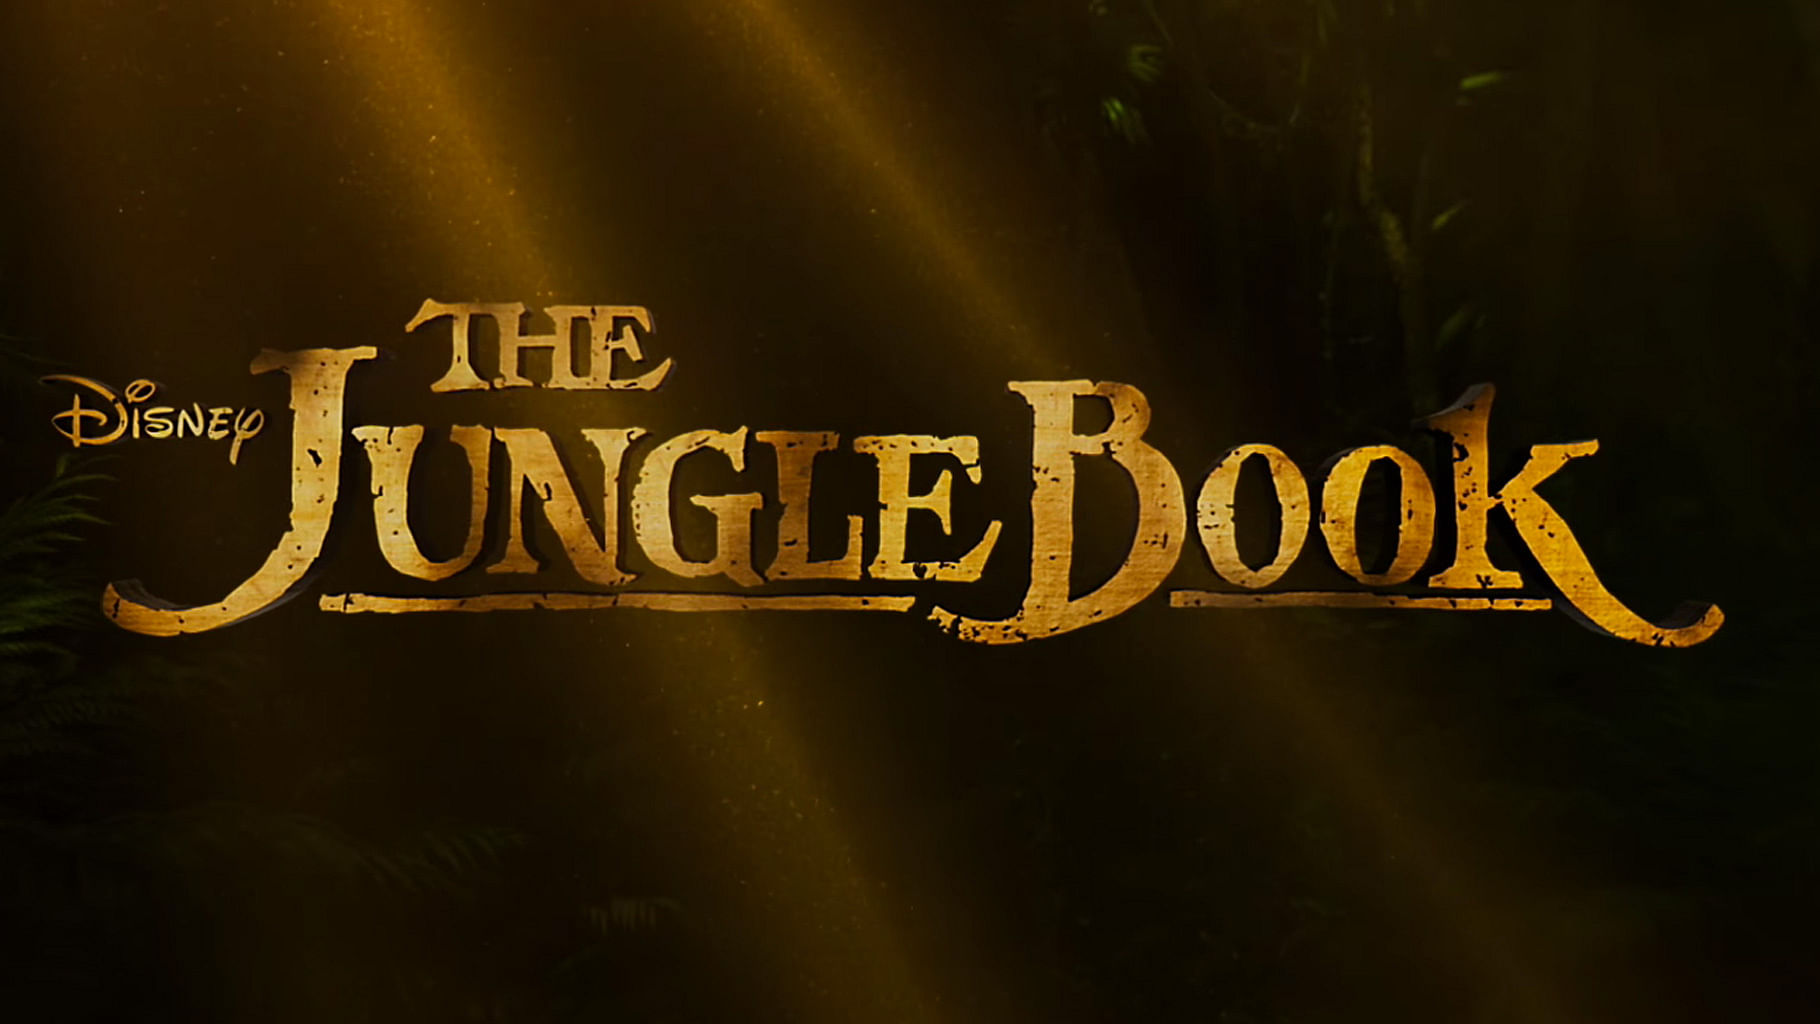 A screengrab from the trailer of <i>The Jungle Book. (</i>Photo Courtesy: Youtube/<a href="https://www.youtube.com/watch?v=JCgPGFunkig&amp;feature=youtu.be">UTV Motion Pictures</a>)